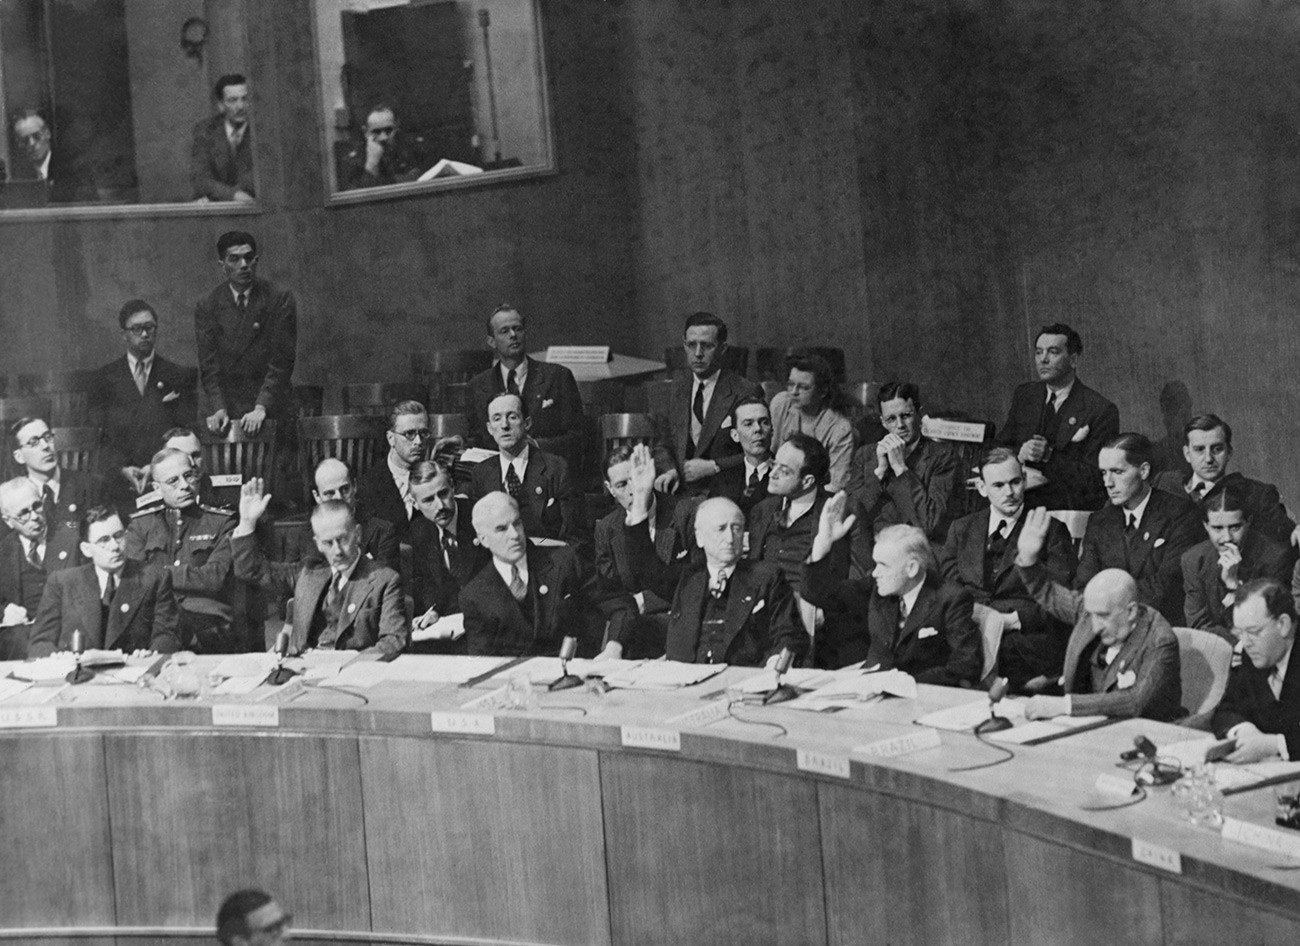 The United Nations Security Council votes in favor of further discussion over the dispute between Iran and the Soviet Union over Azerbaijan.